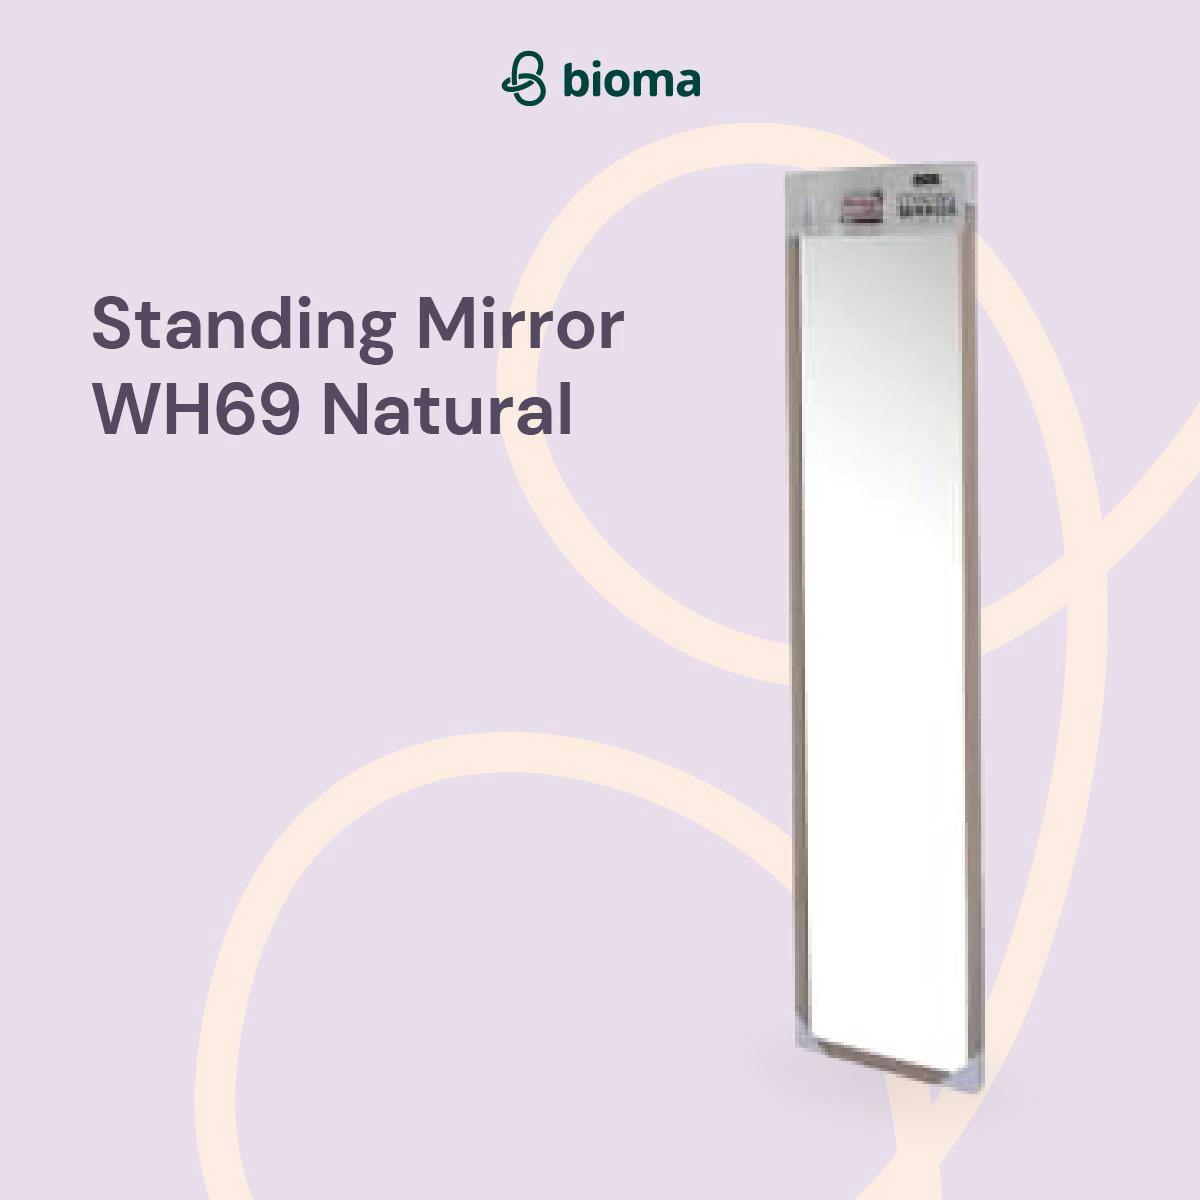 Standing Mirror WH69 Natural